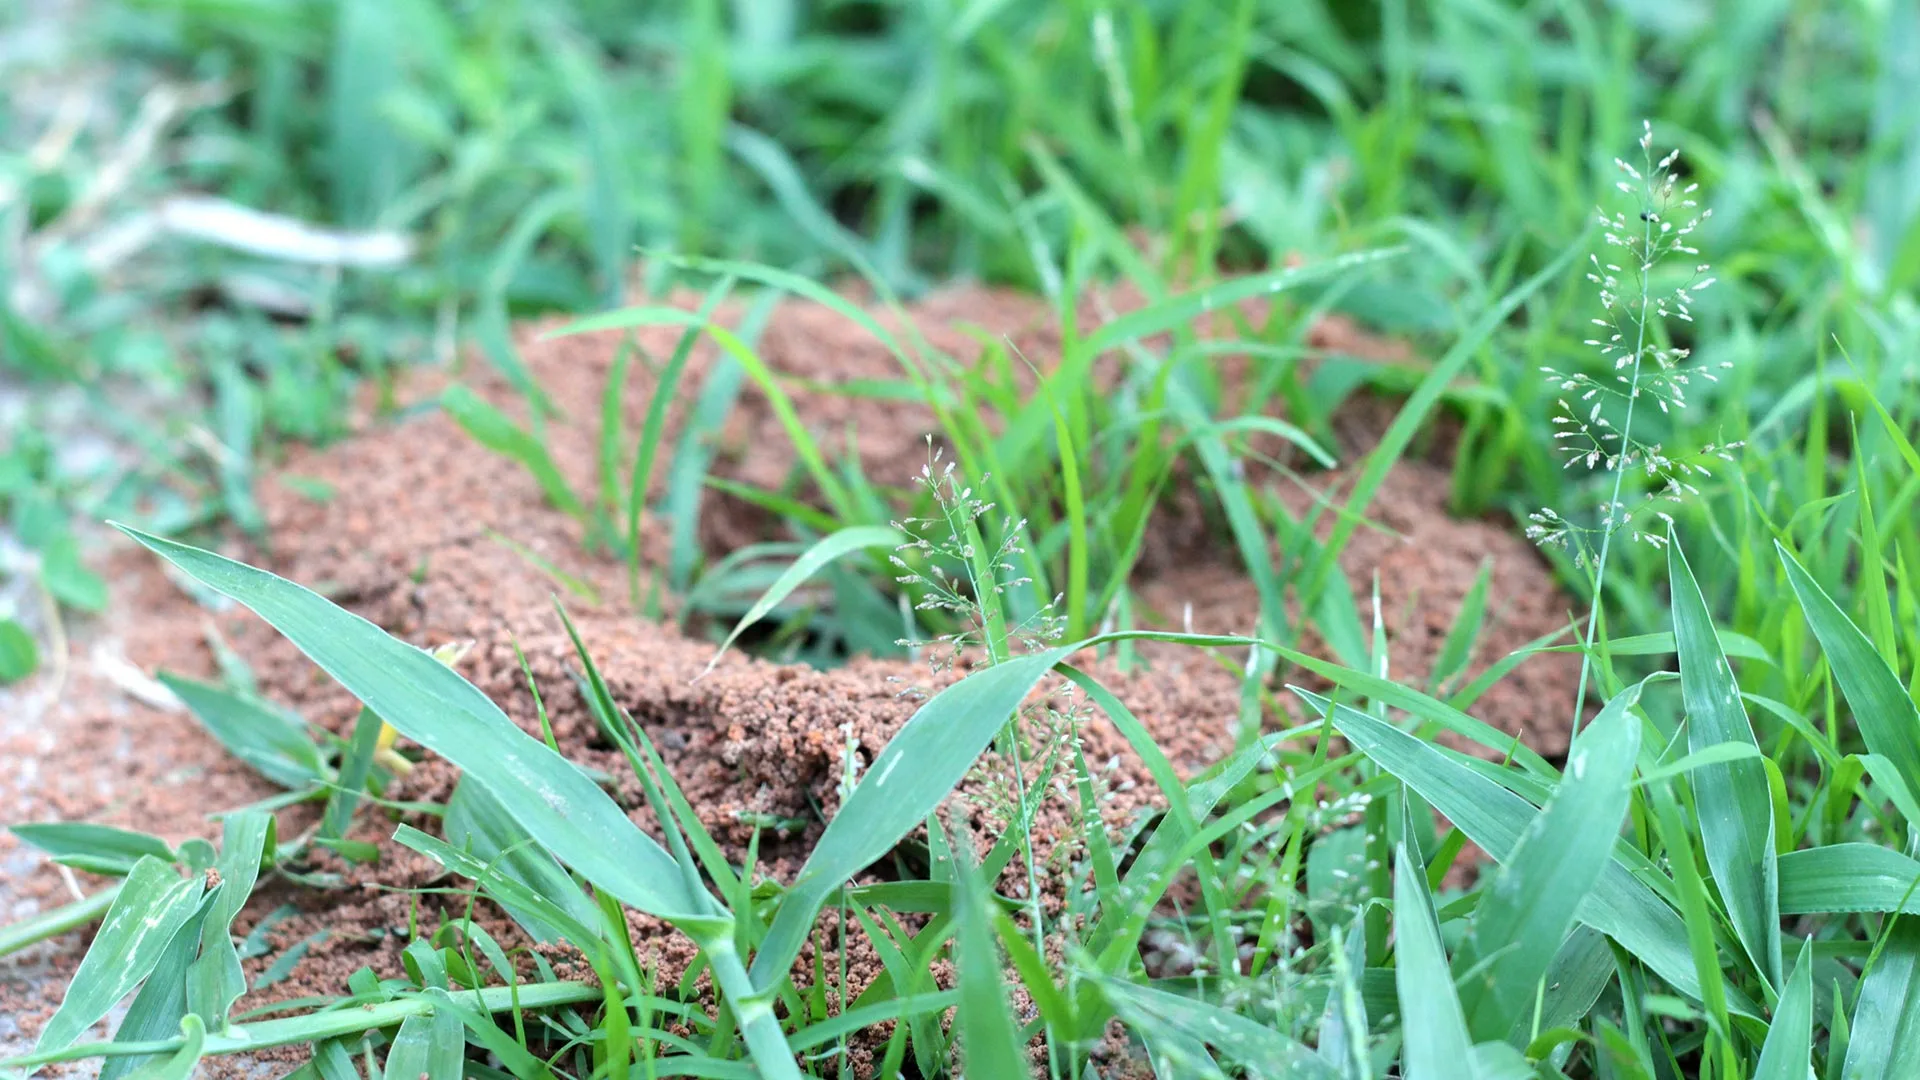 Ant hill found in lawn in Westfield, IN.